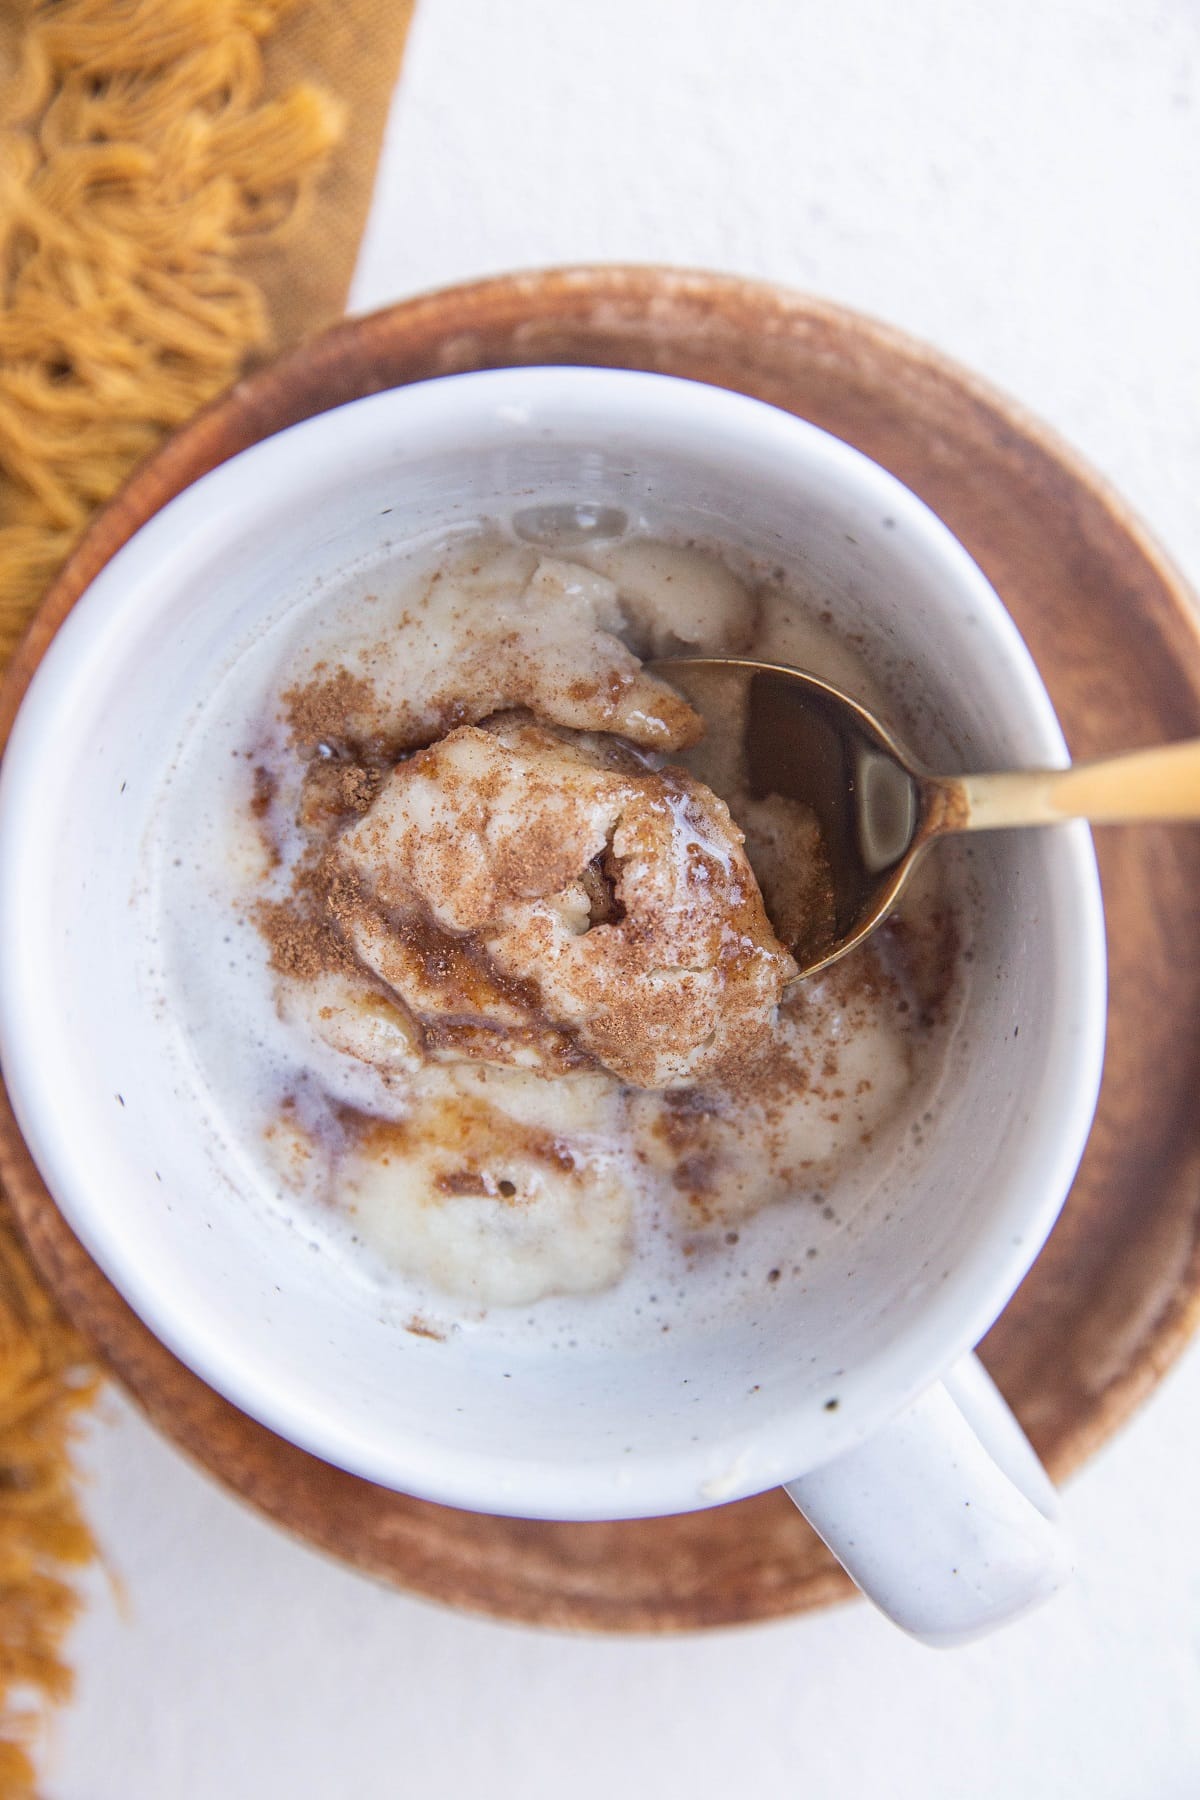 Healthy Cinnamon Roll in a Mug - The Roasted Root